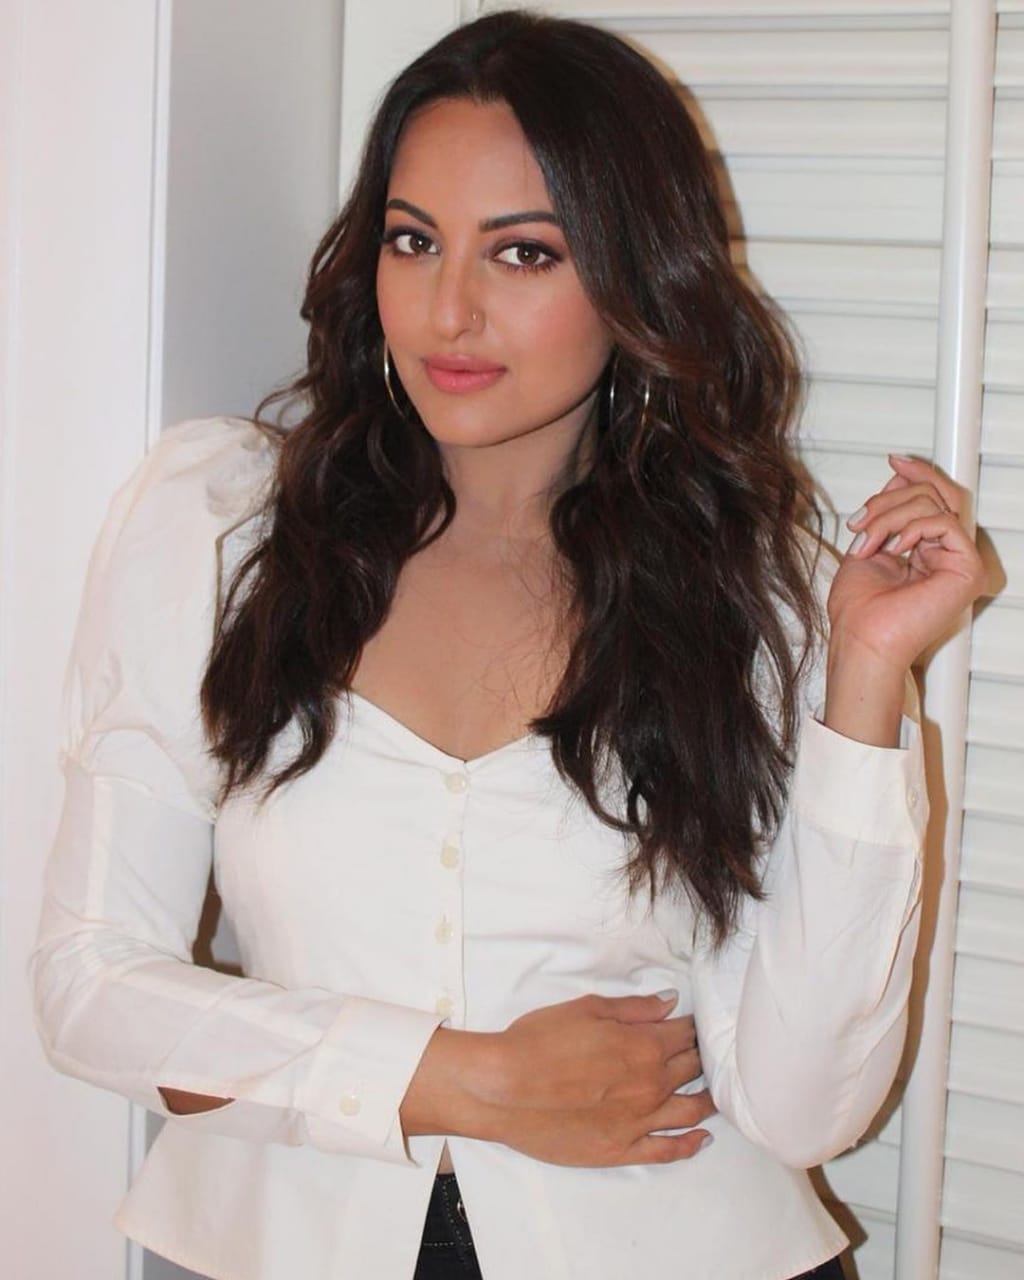 Sonakshi Sinha makes a strong case for classic white shirt and black pants in her latest fashion outing